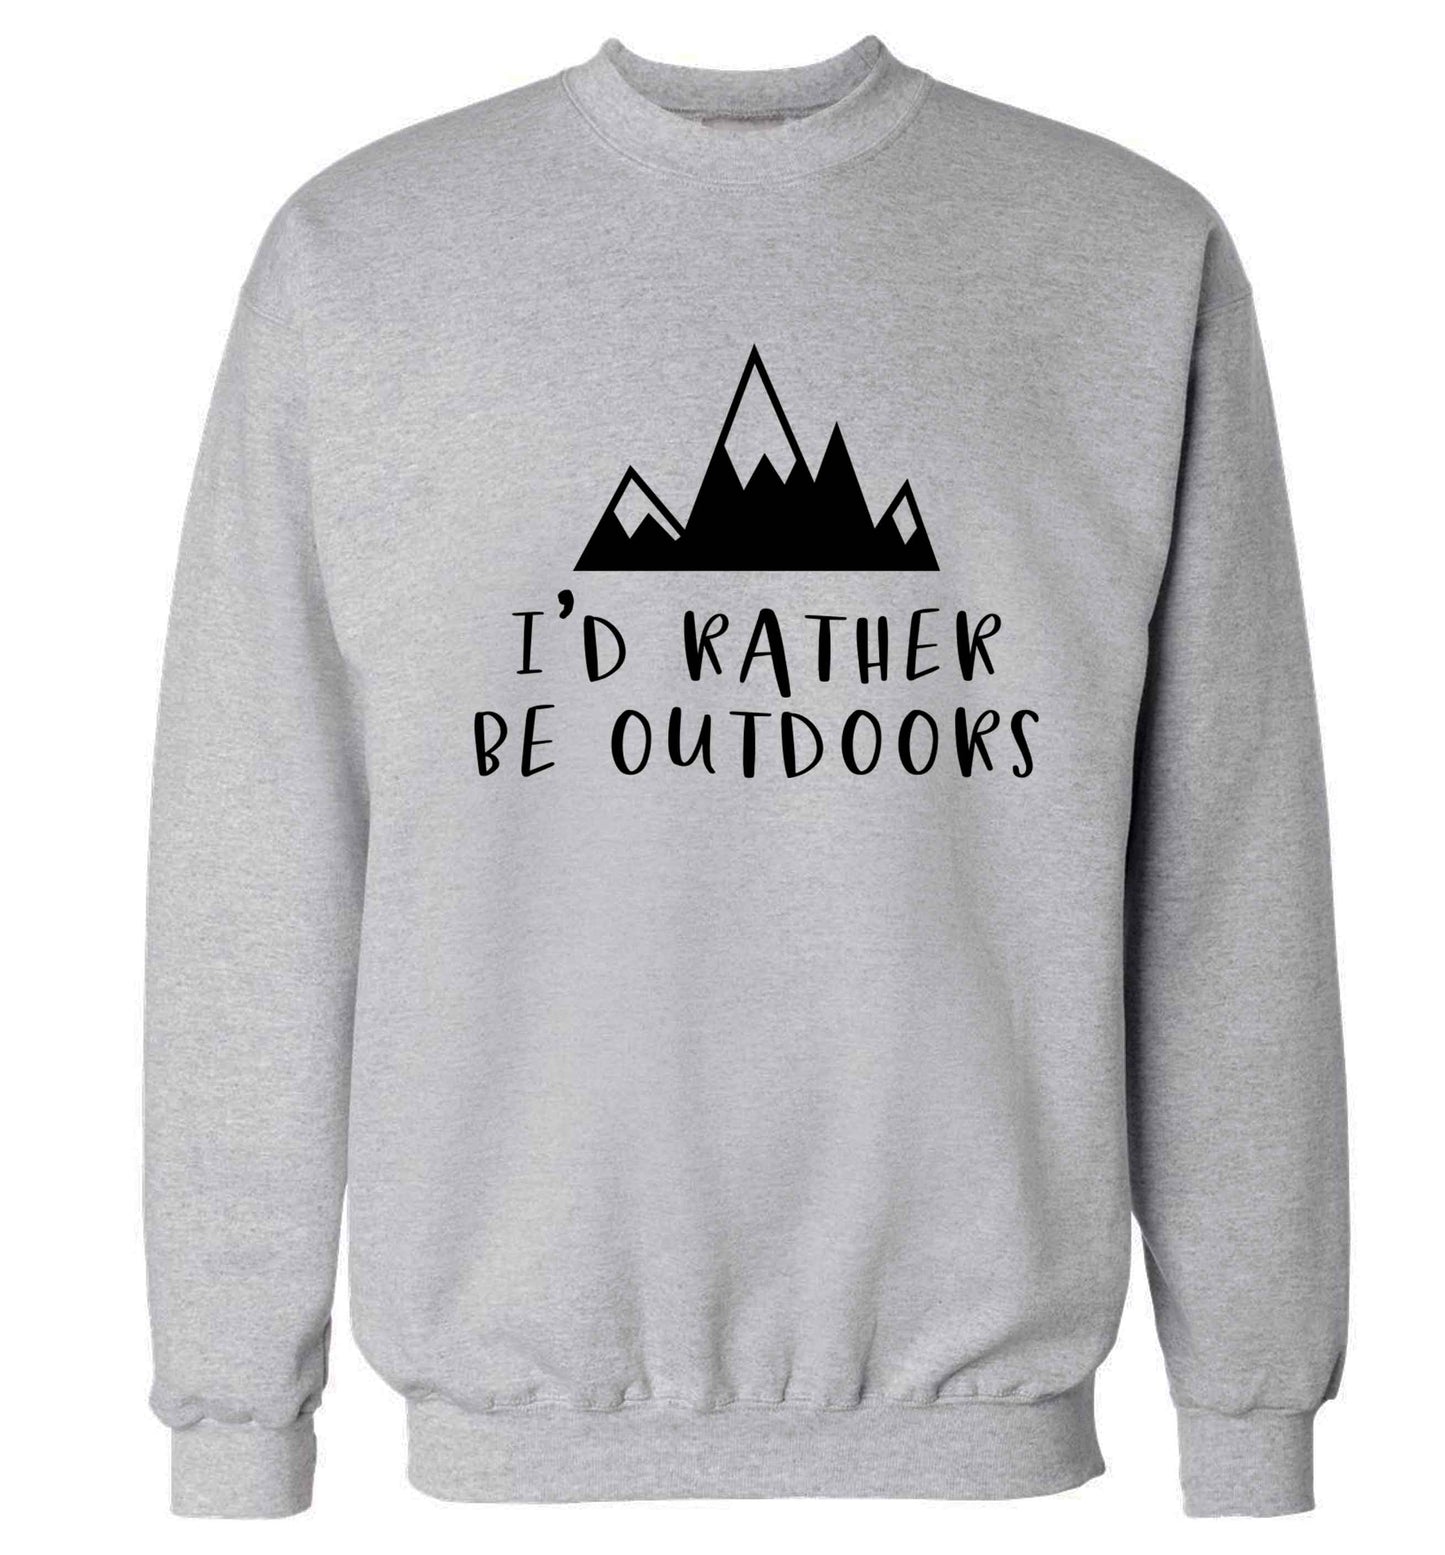 I'd rather be outdoors Adult's unisex grey Sweater 2XL